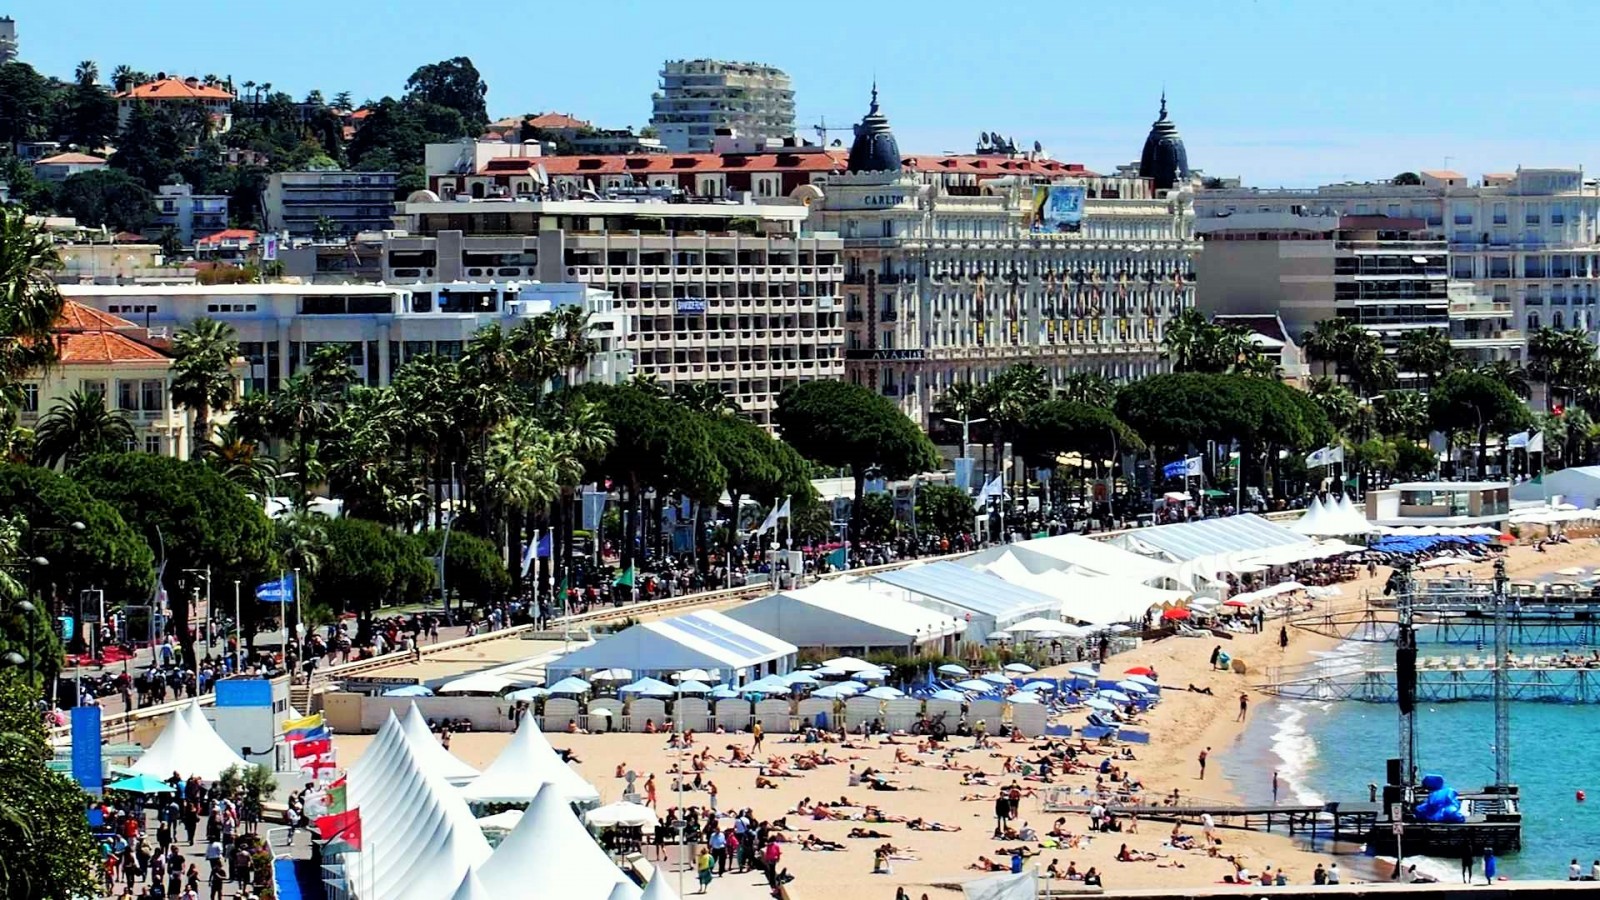  Croisette in cannes